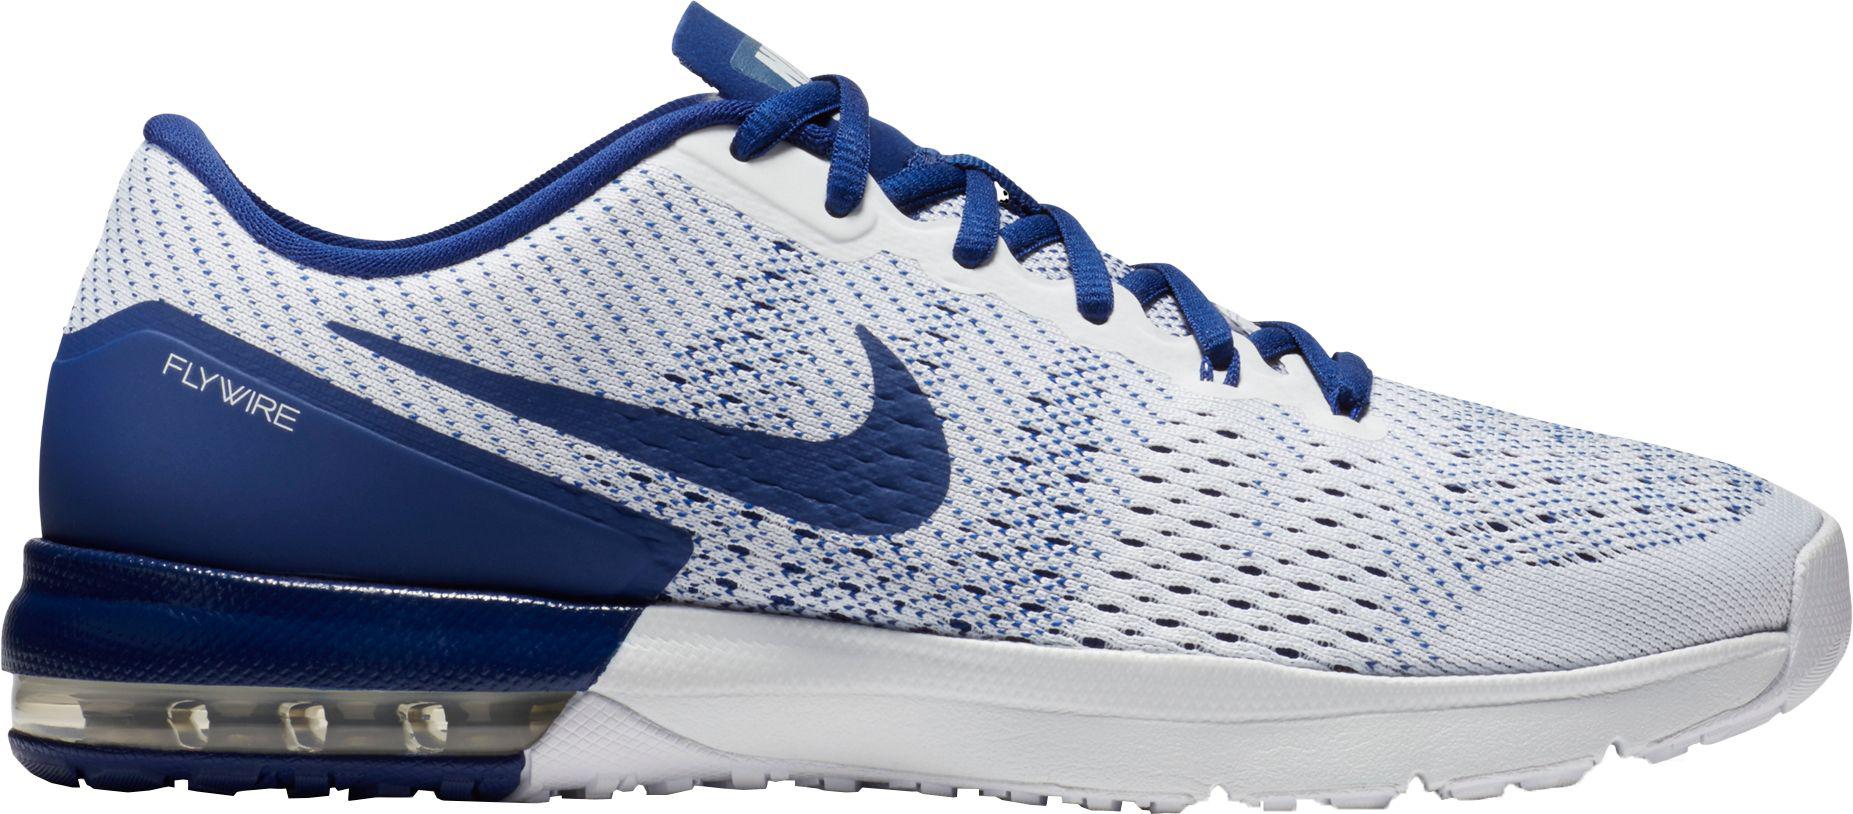 15 Minute Nike Air Workout Shoes for Push Pull Legs